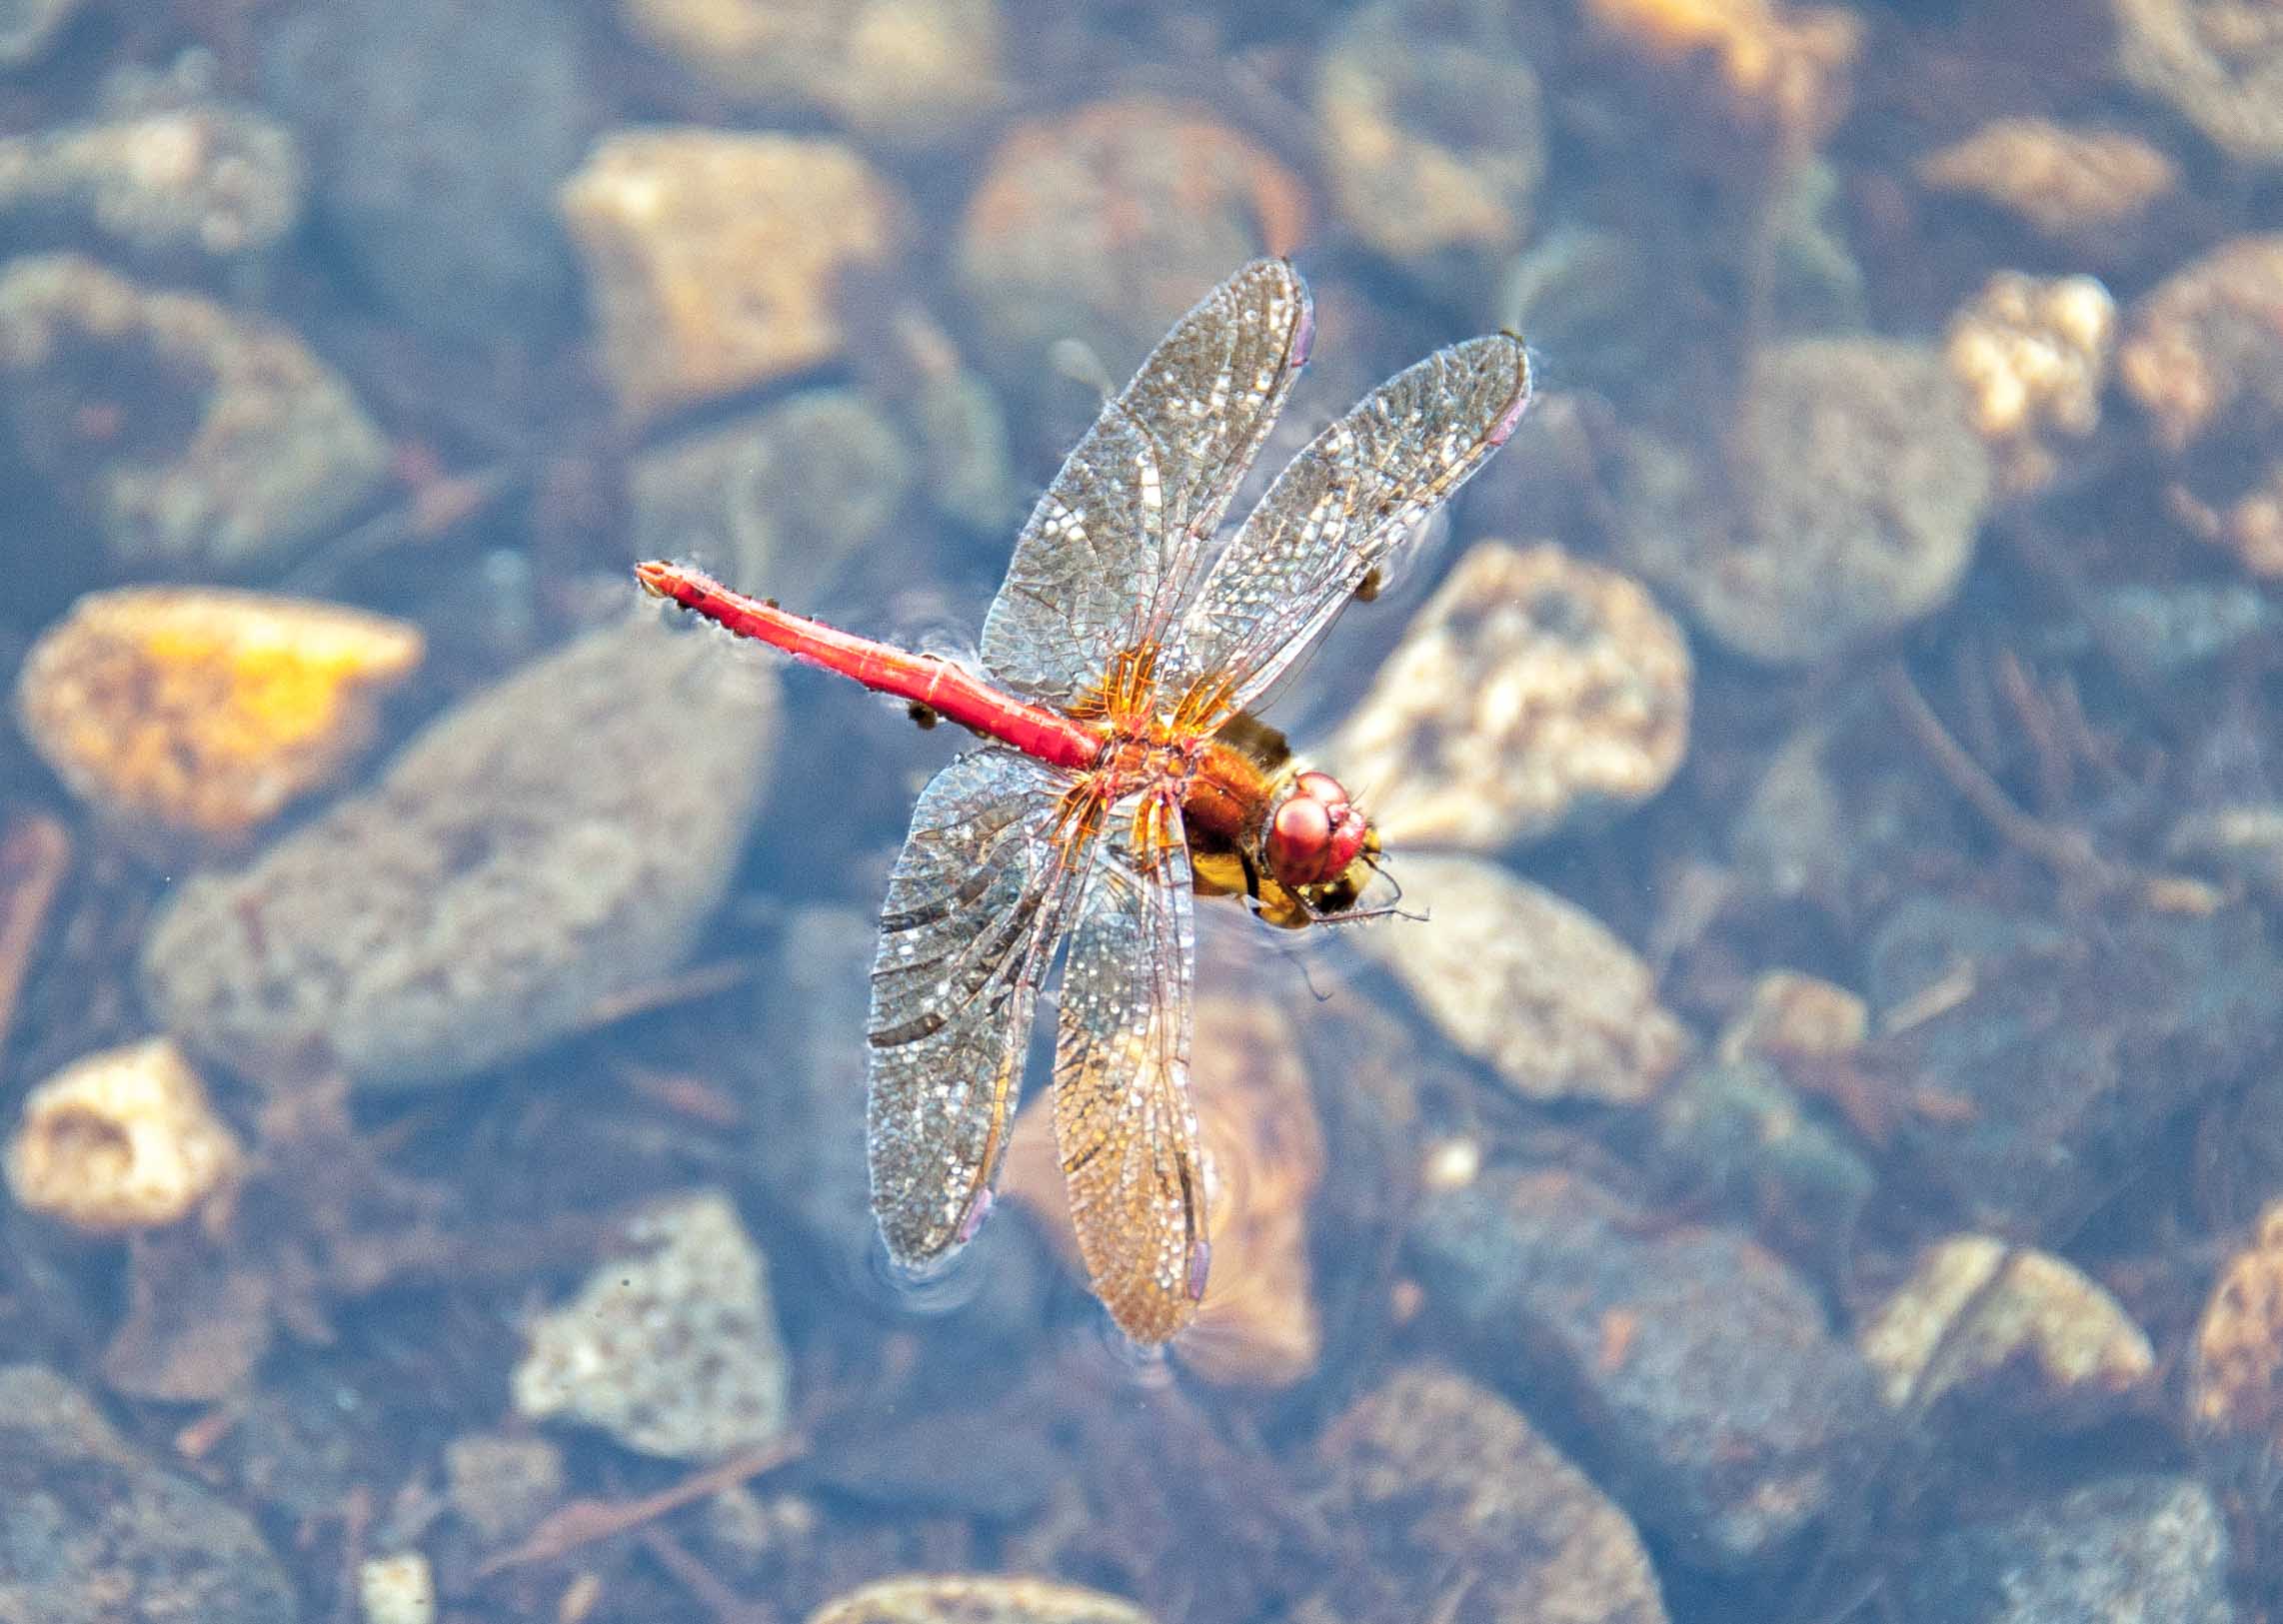 First Tuesday Tips: Tip 8, Adult Dragonflies Can Make for Exciting Fishing